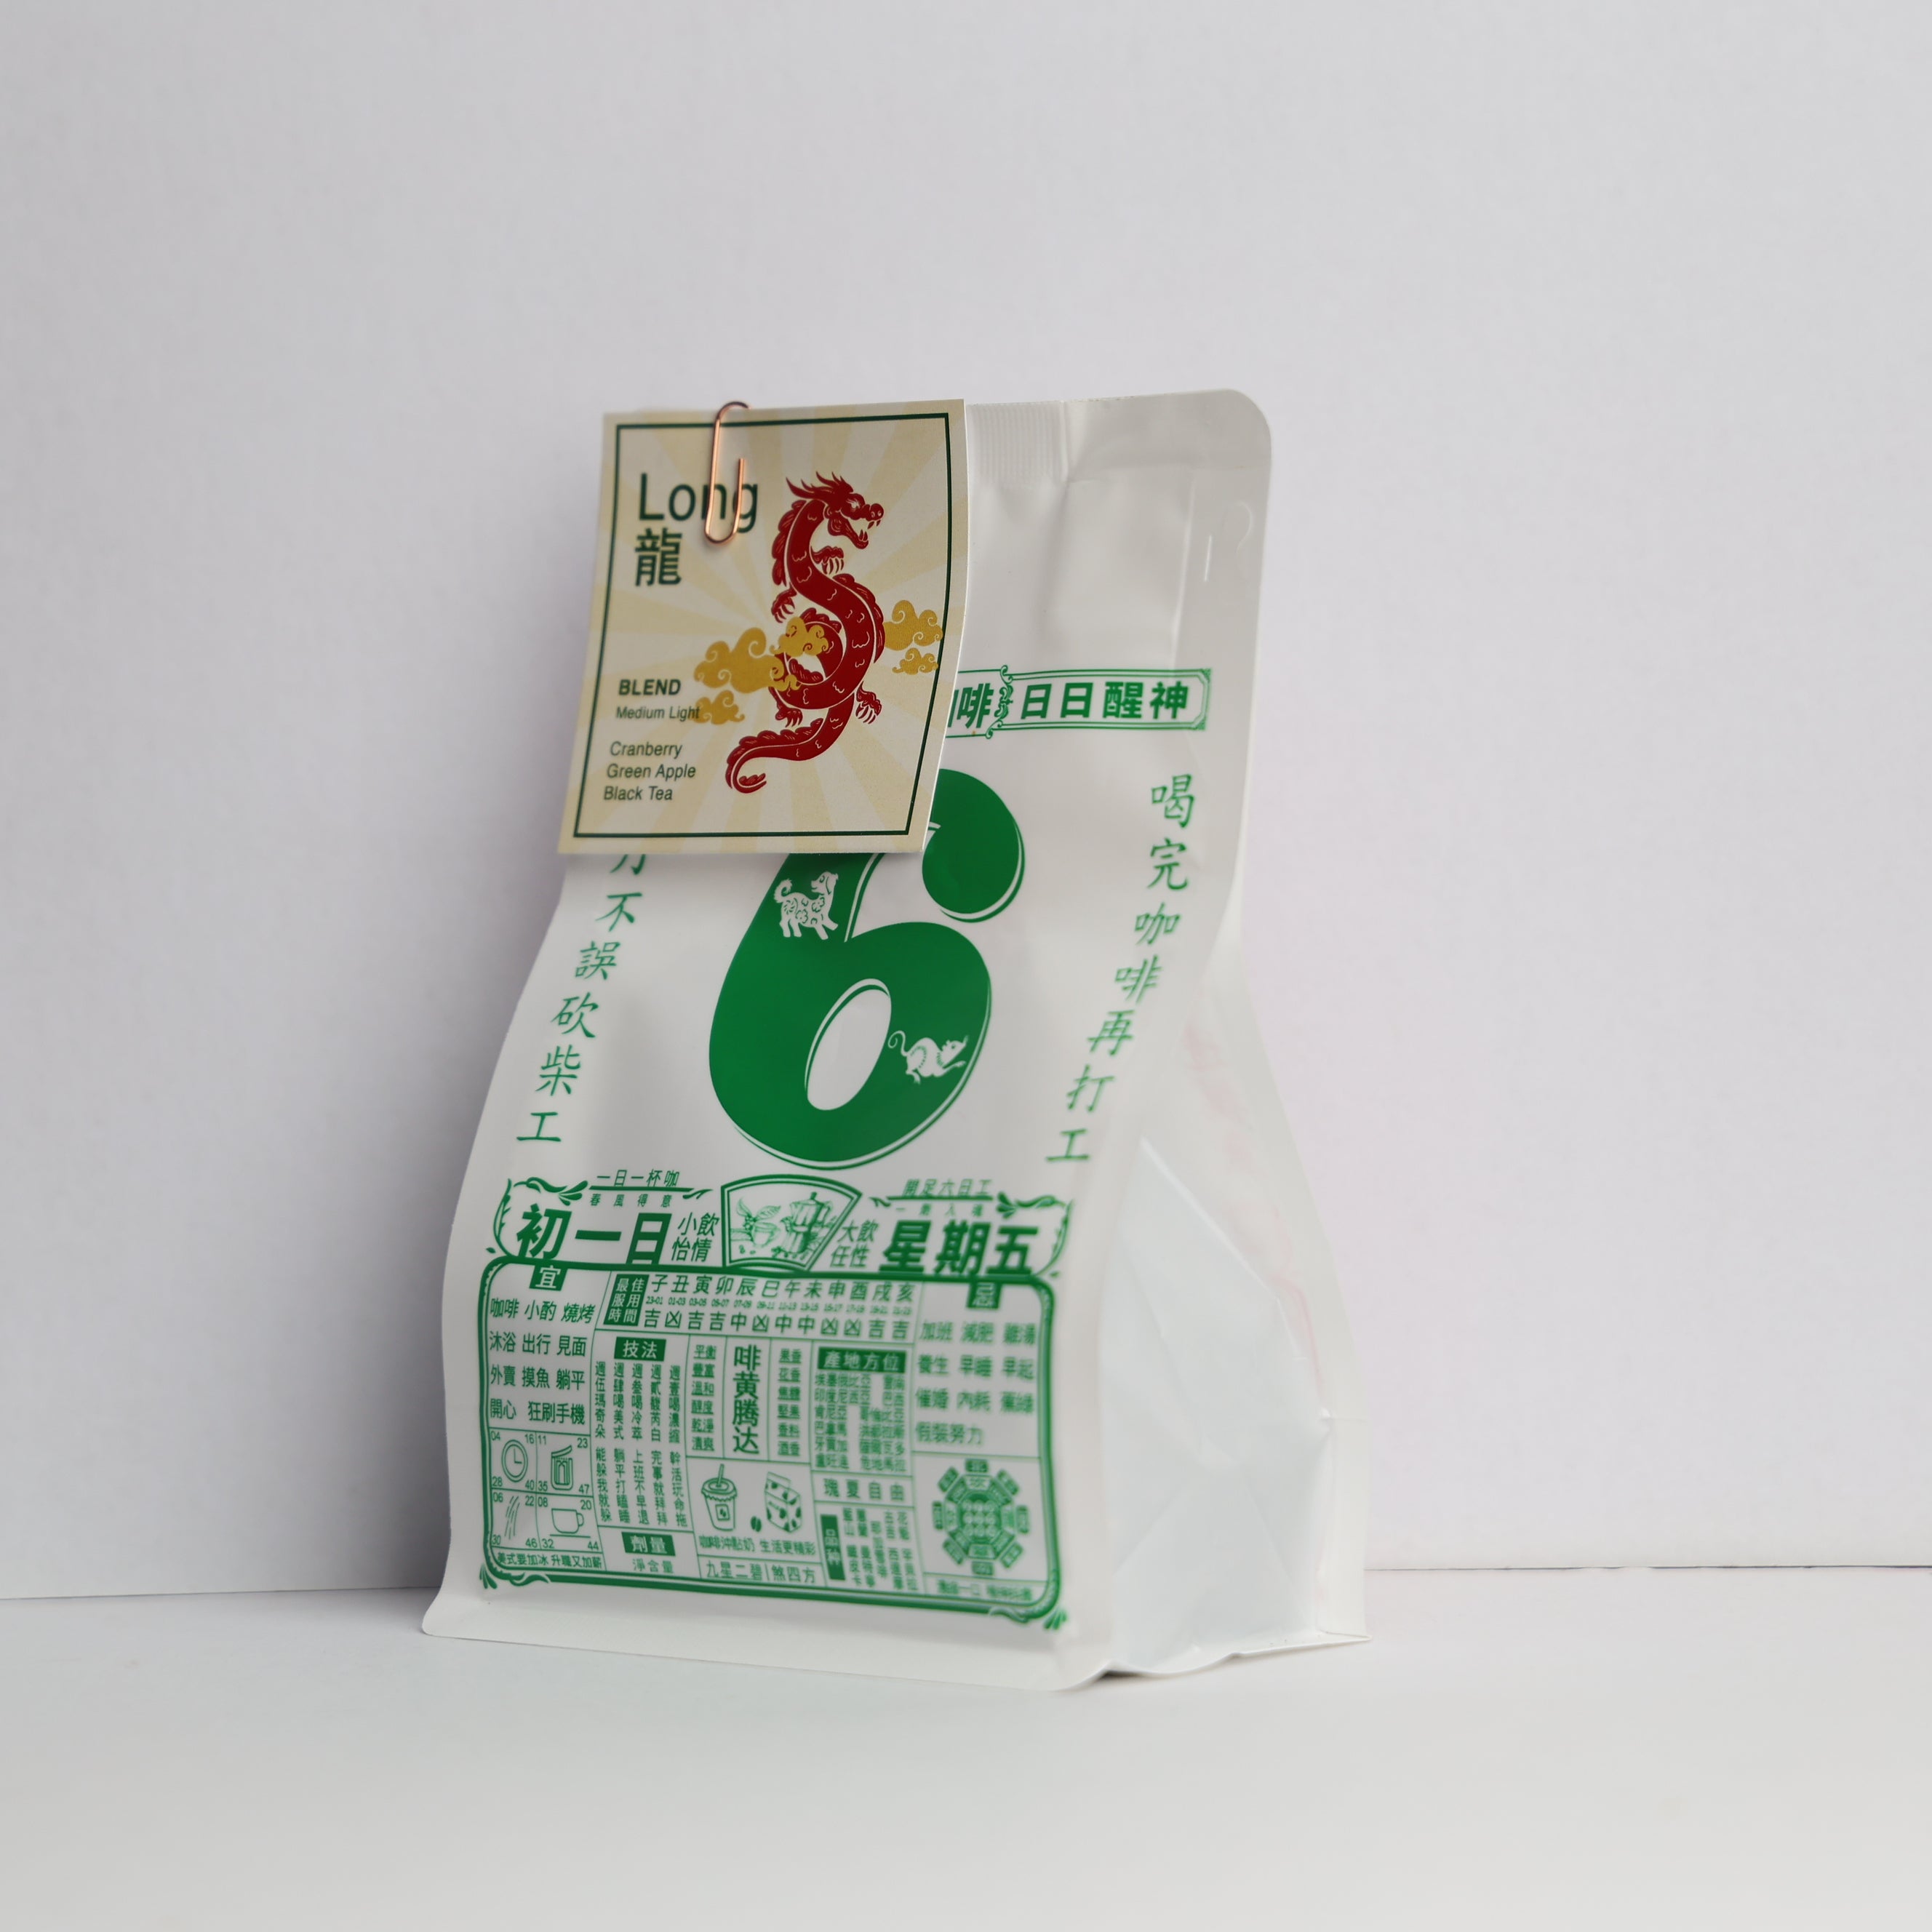 (CNY Deal) Roasted Coffee Beans:  Long 龍 - Soon Specialty Coffee